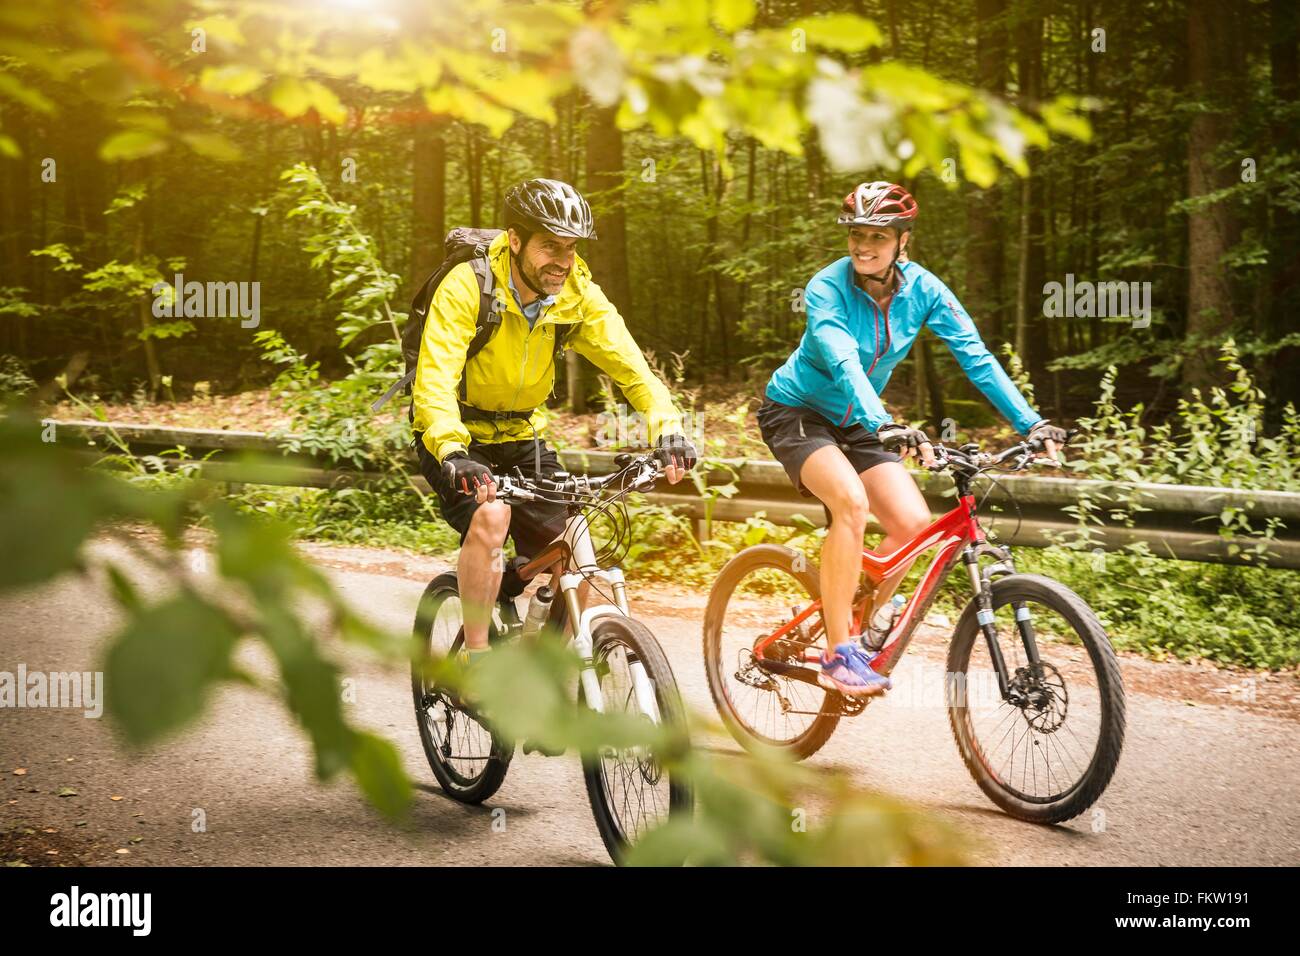 Mature mountain biking couple cycling along rural forest road Stock Photo